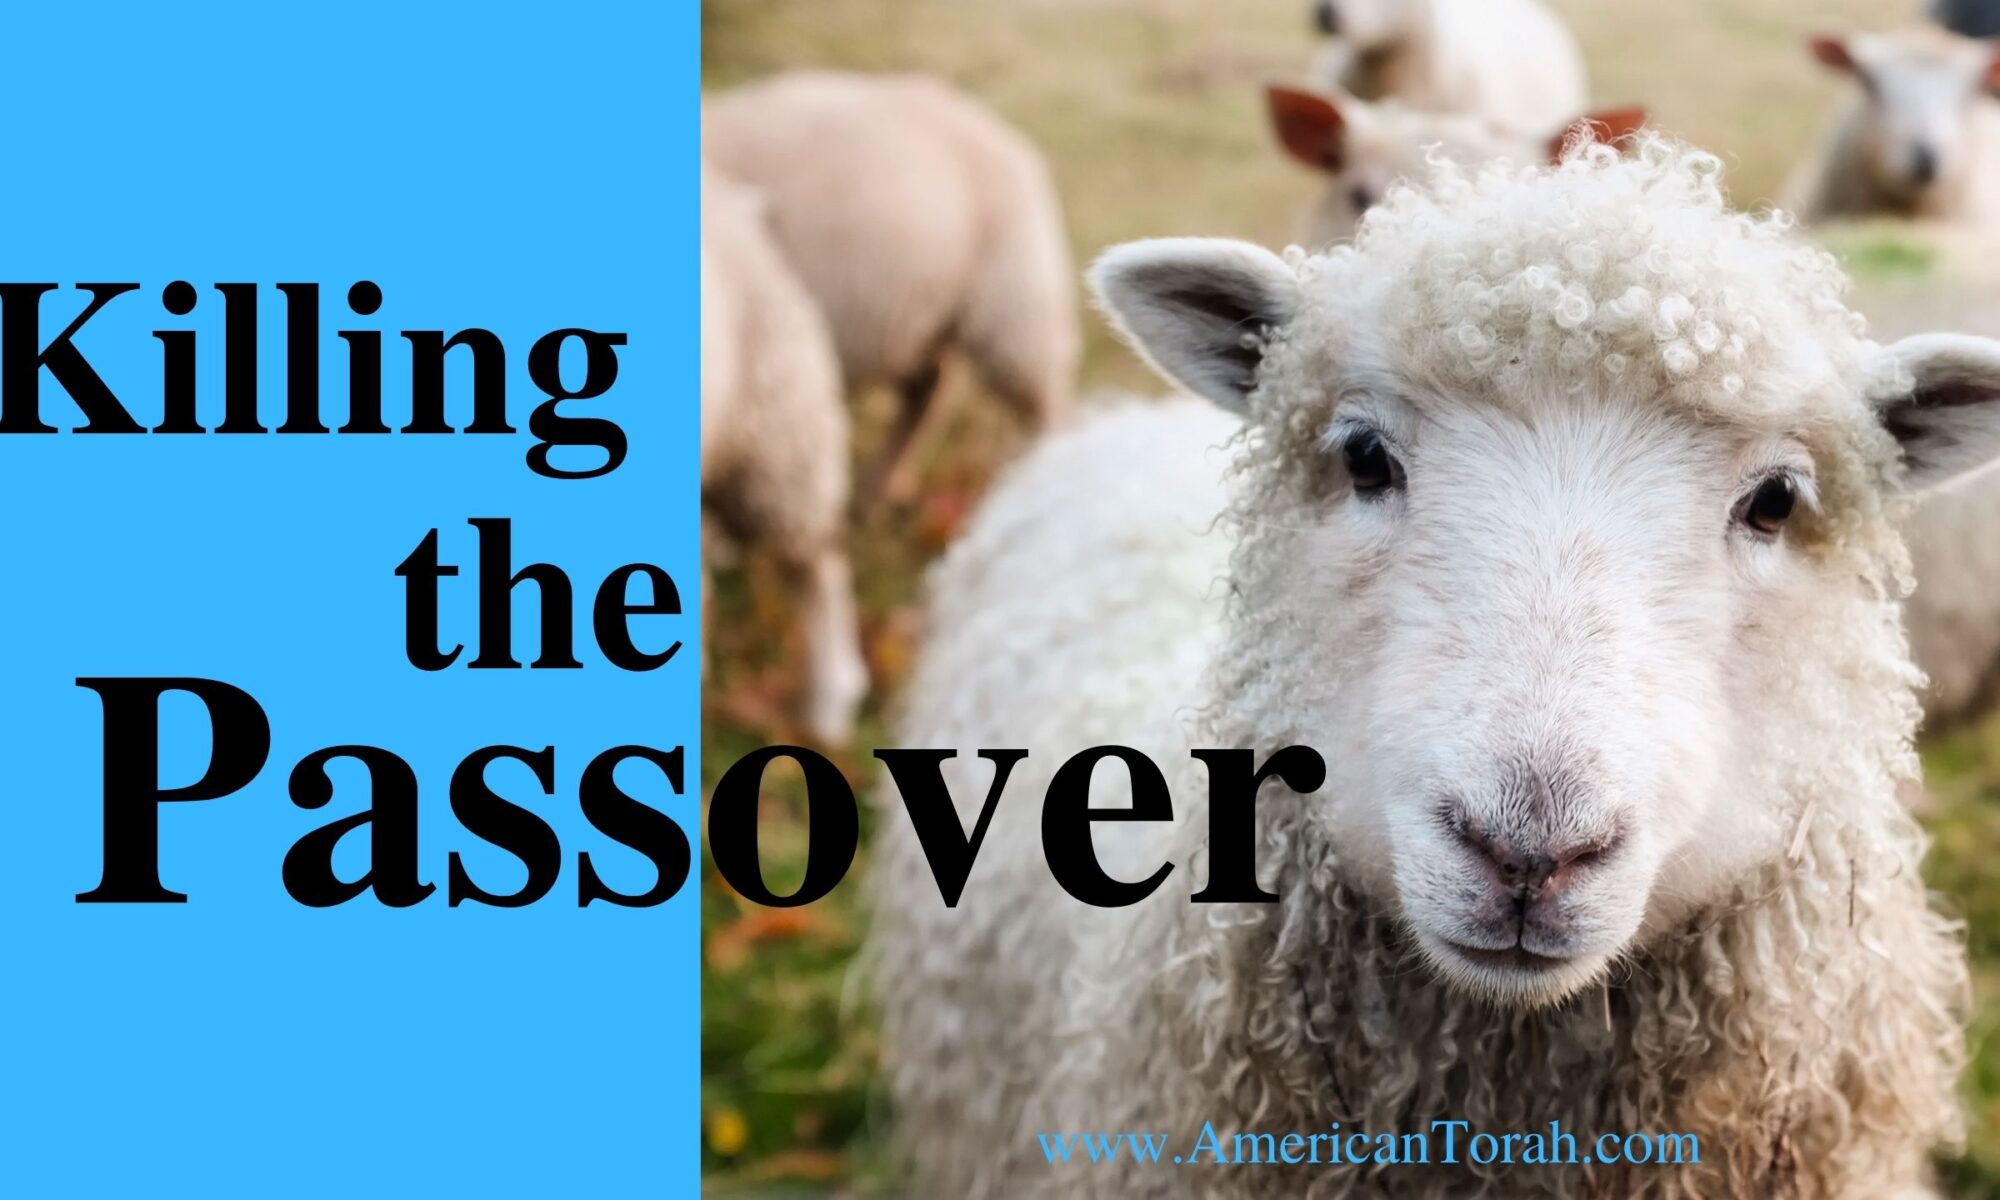 The how, when, were, and why of killing the Passover.